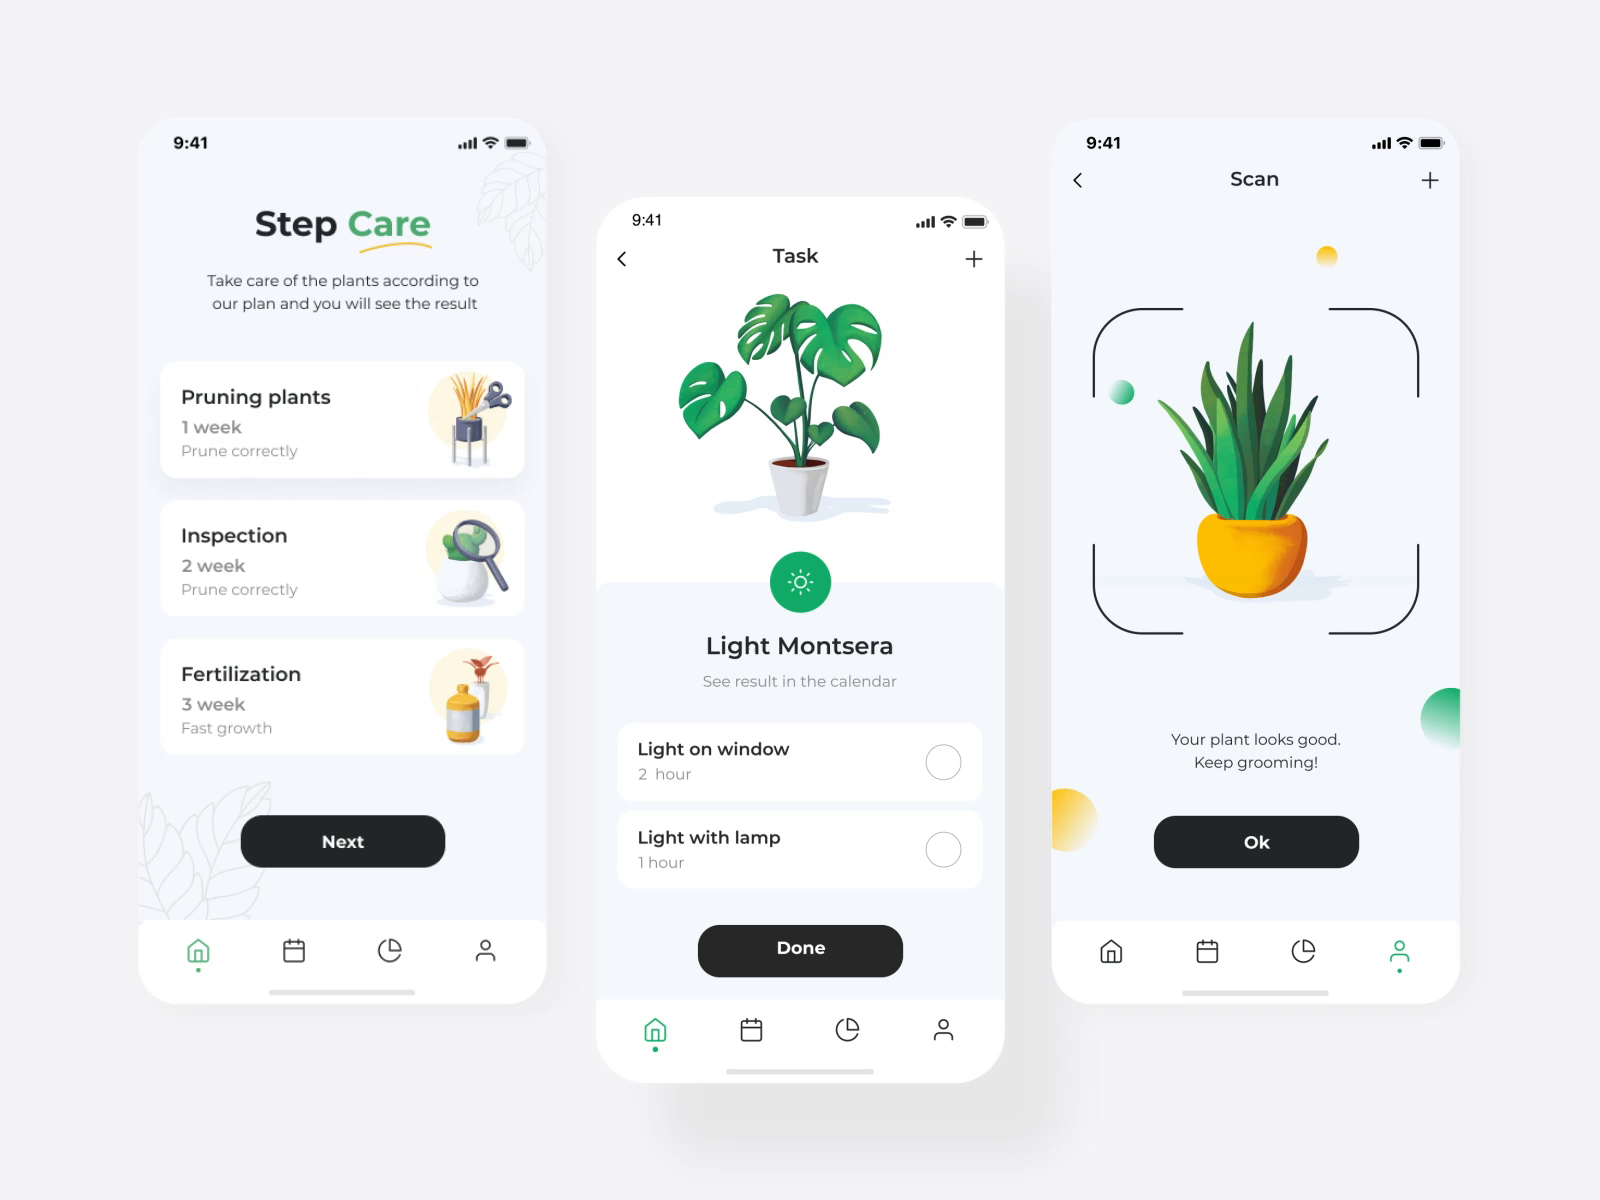 plant-care-mobile-interaction-with-illustrations-by-taras-migulko-on